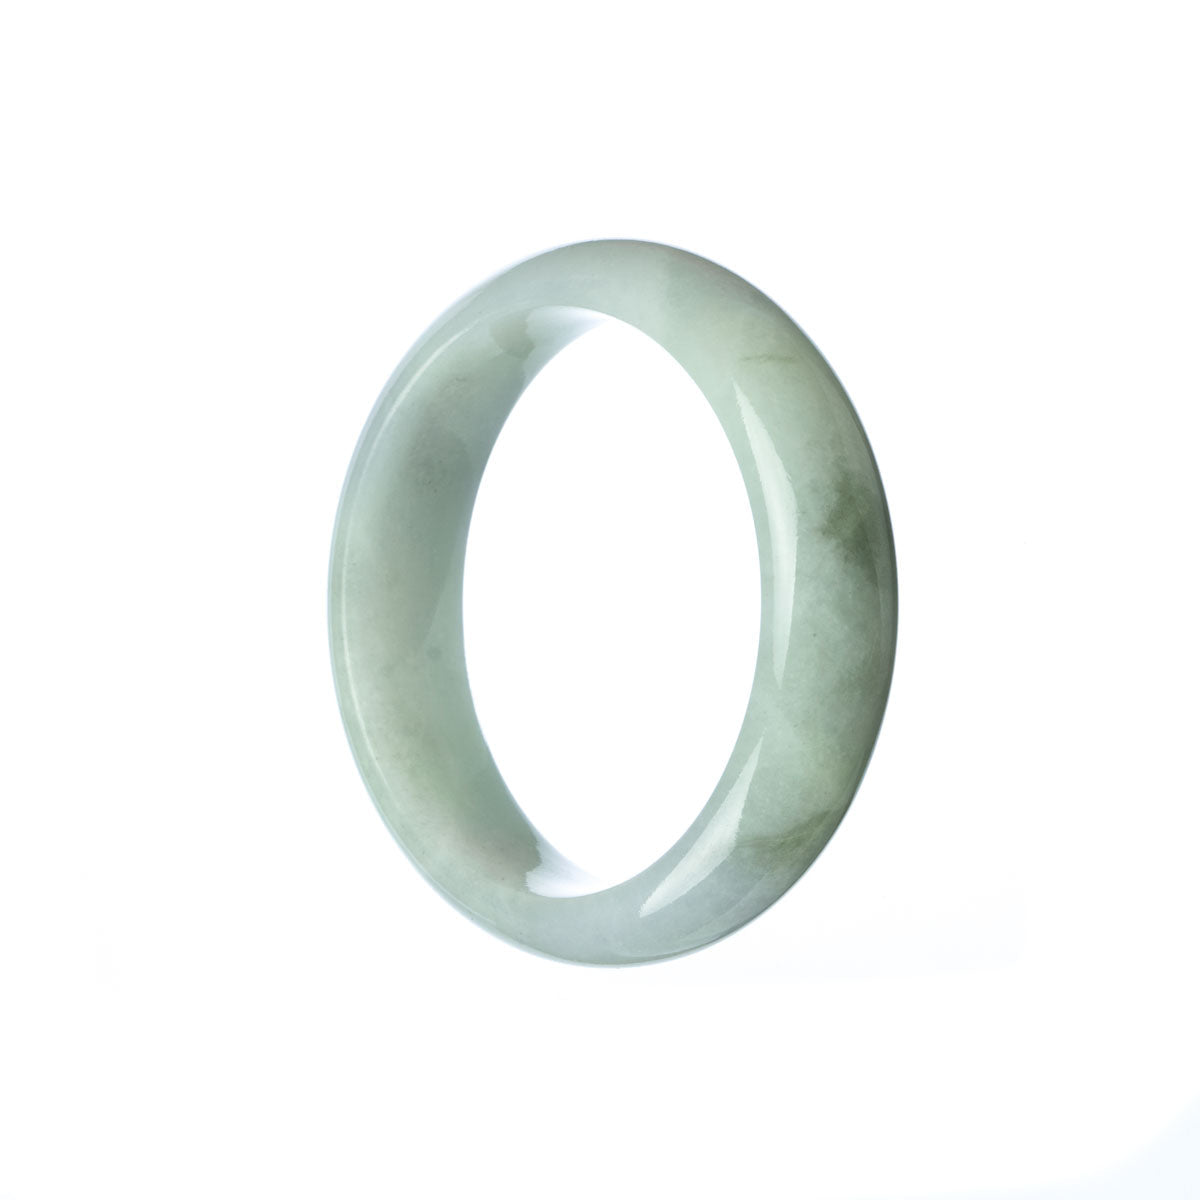 A pale green jade bangle with a half moon design, suitable for children.